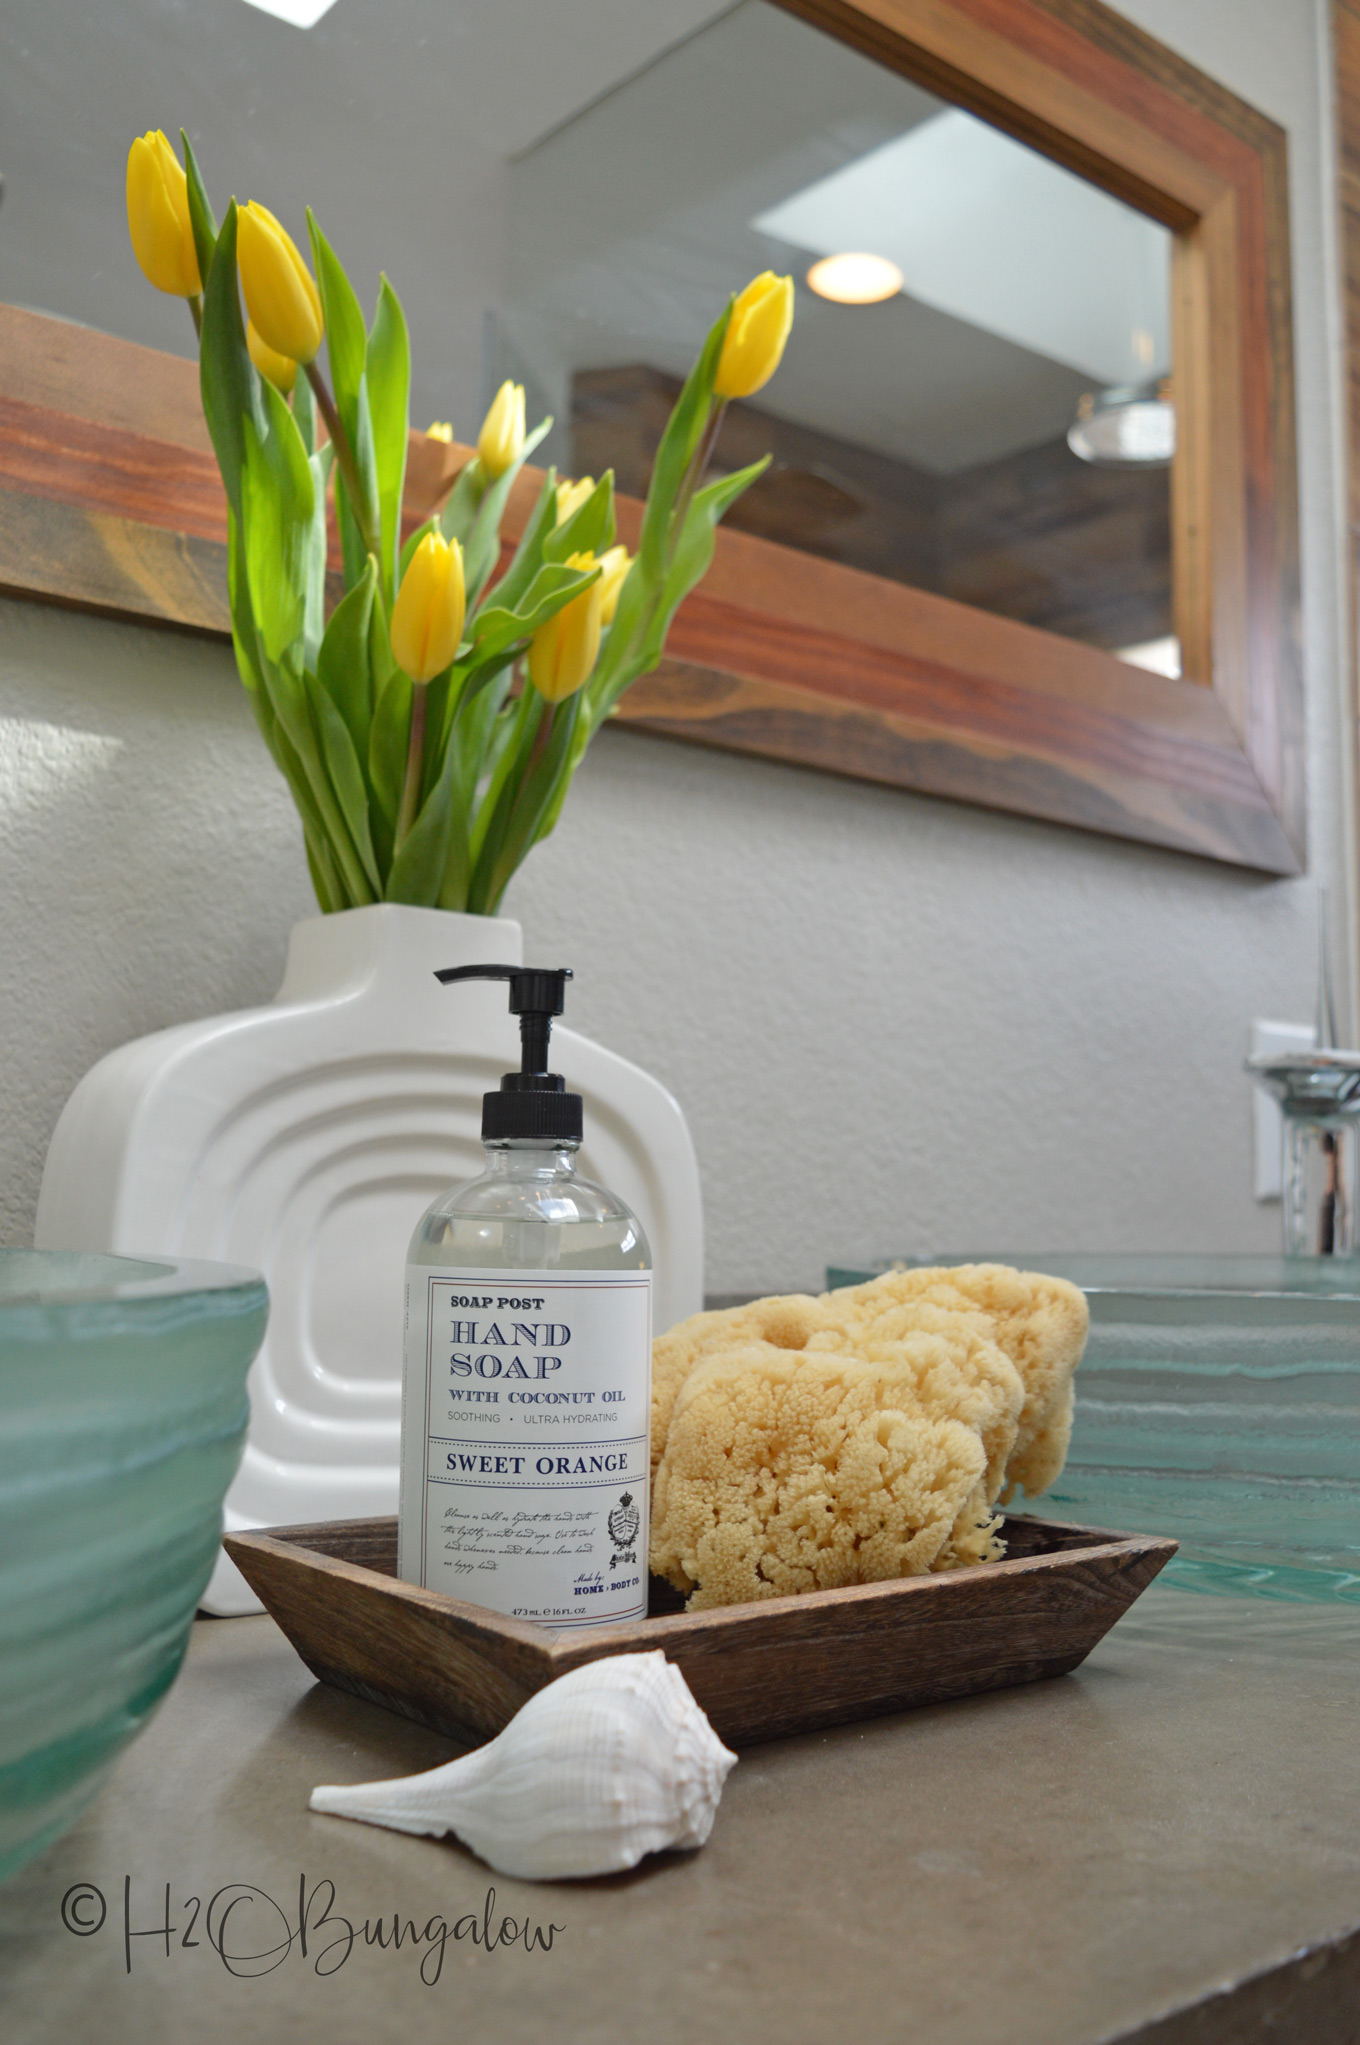 Today I want to share my spring master bath tour and mini makeover. Since we put in new skylights, the master bath was feeling tired. With a few simple changes and a little shopping, my coastal rustic master bath feels fresh and welcoming again. I point out the many awesome DIY projects that make this room special too! 